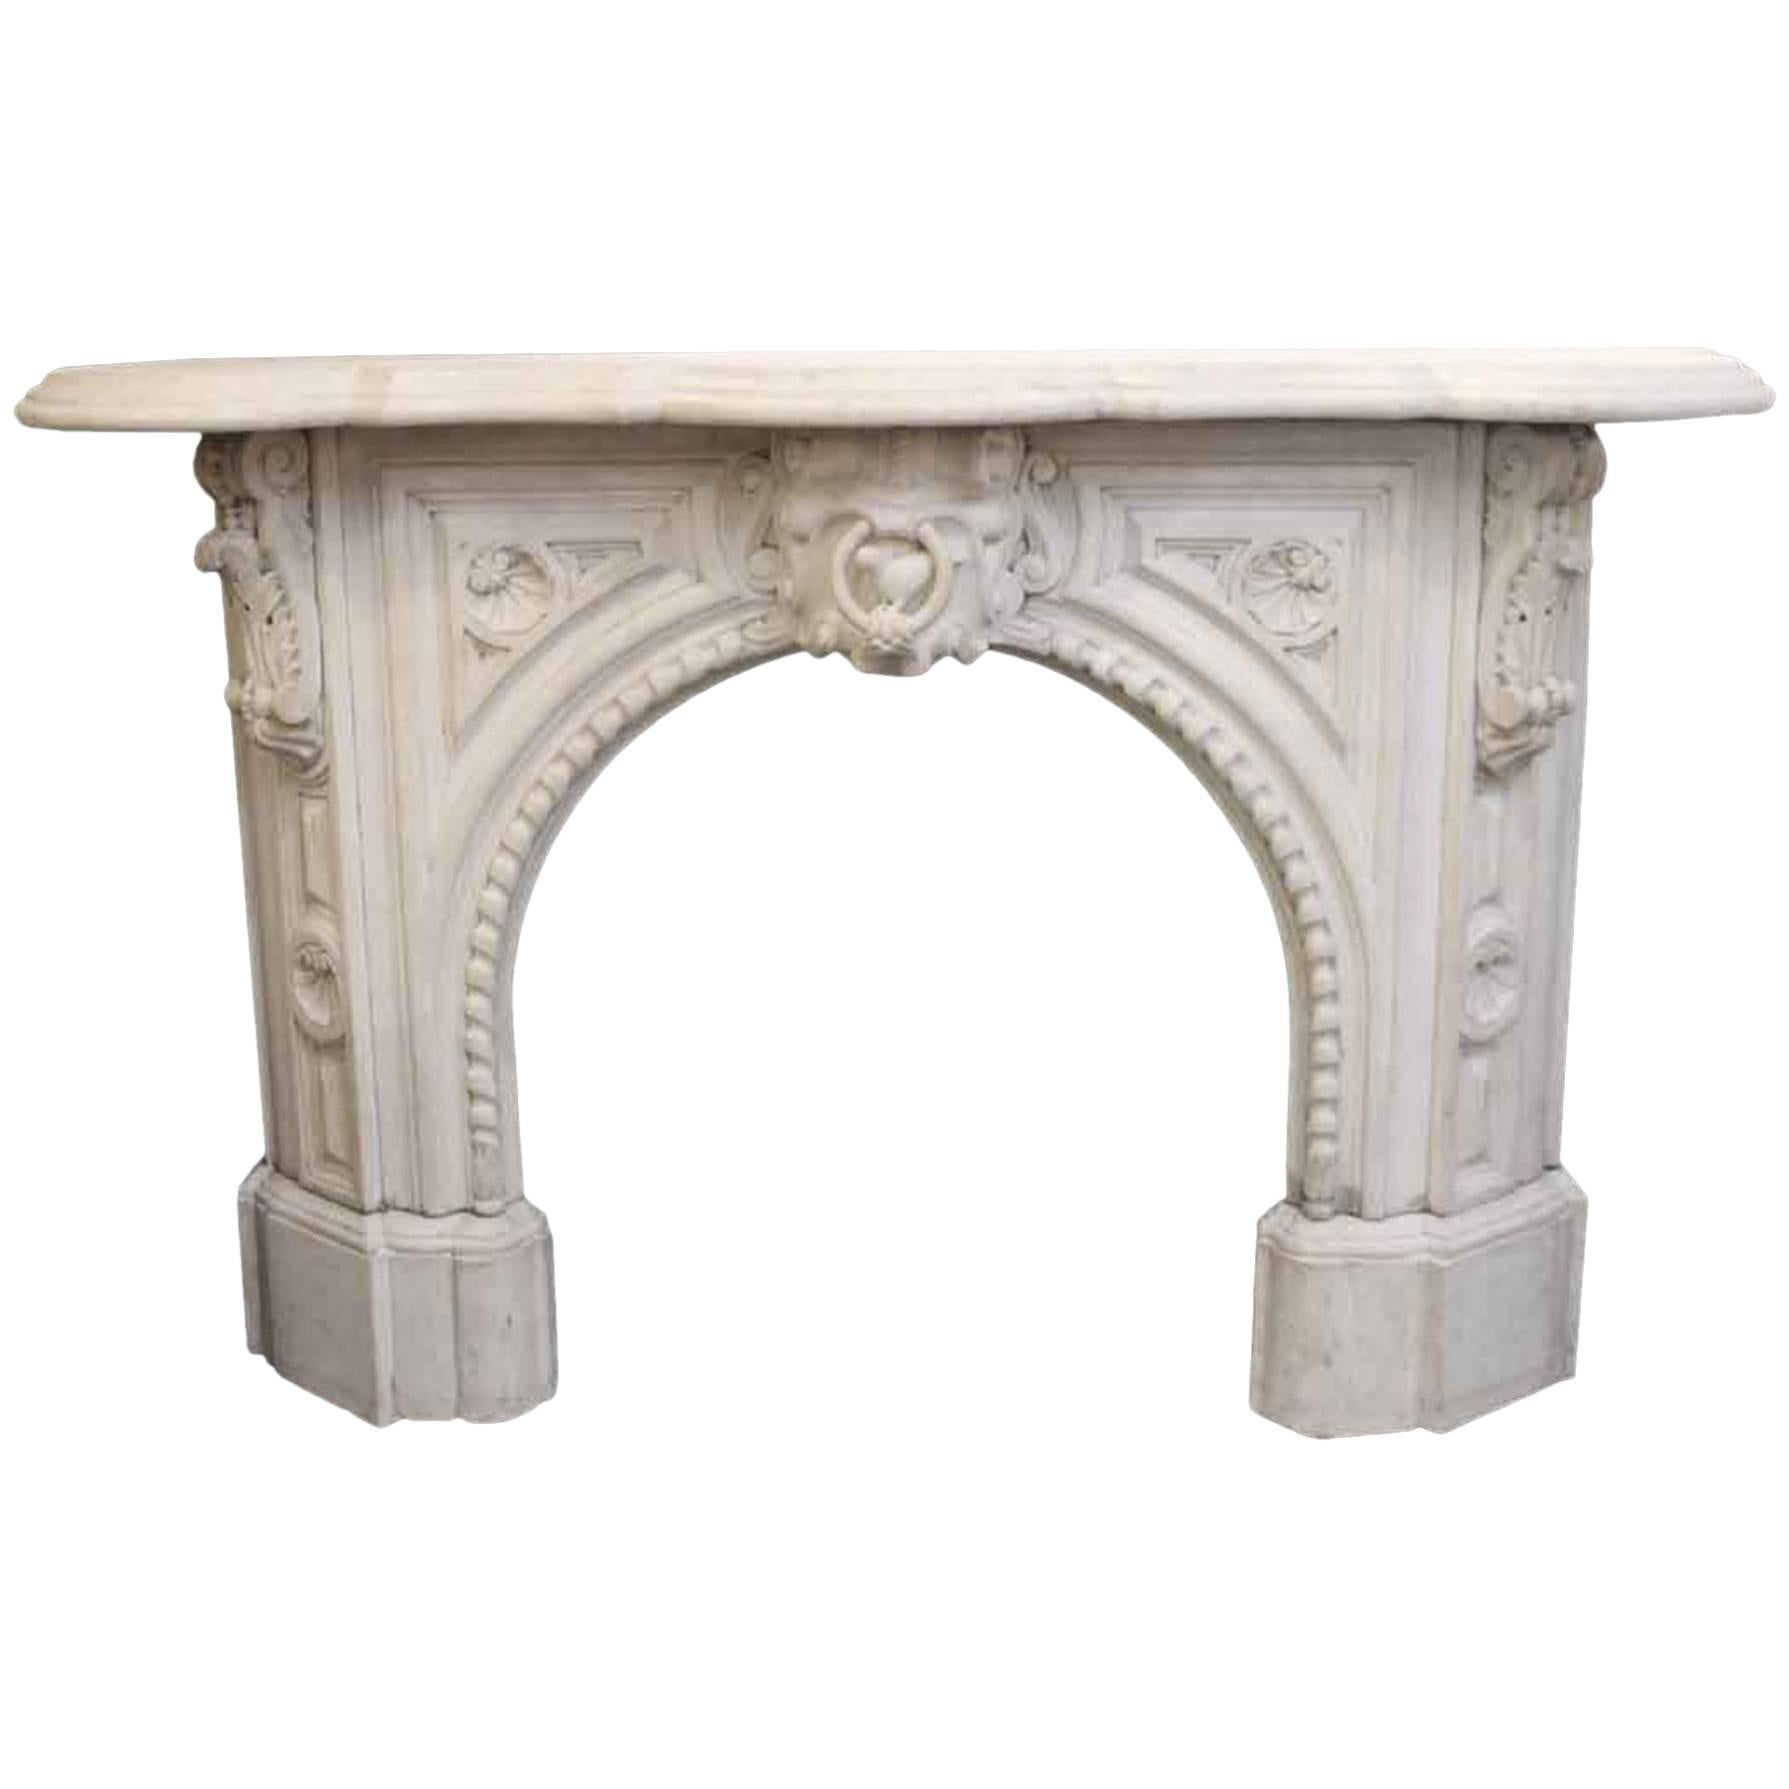 1838 Victorian Arch Statuary White Statuary Marble Mantel